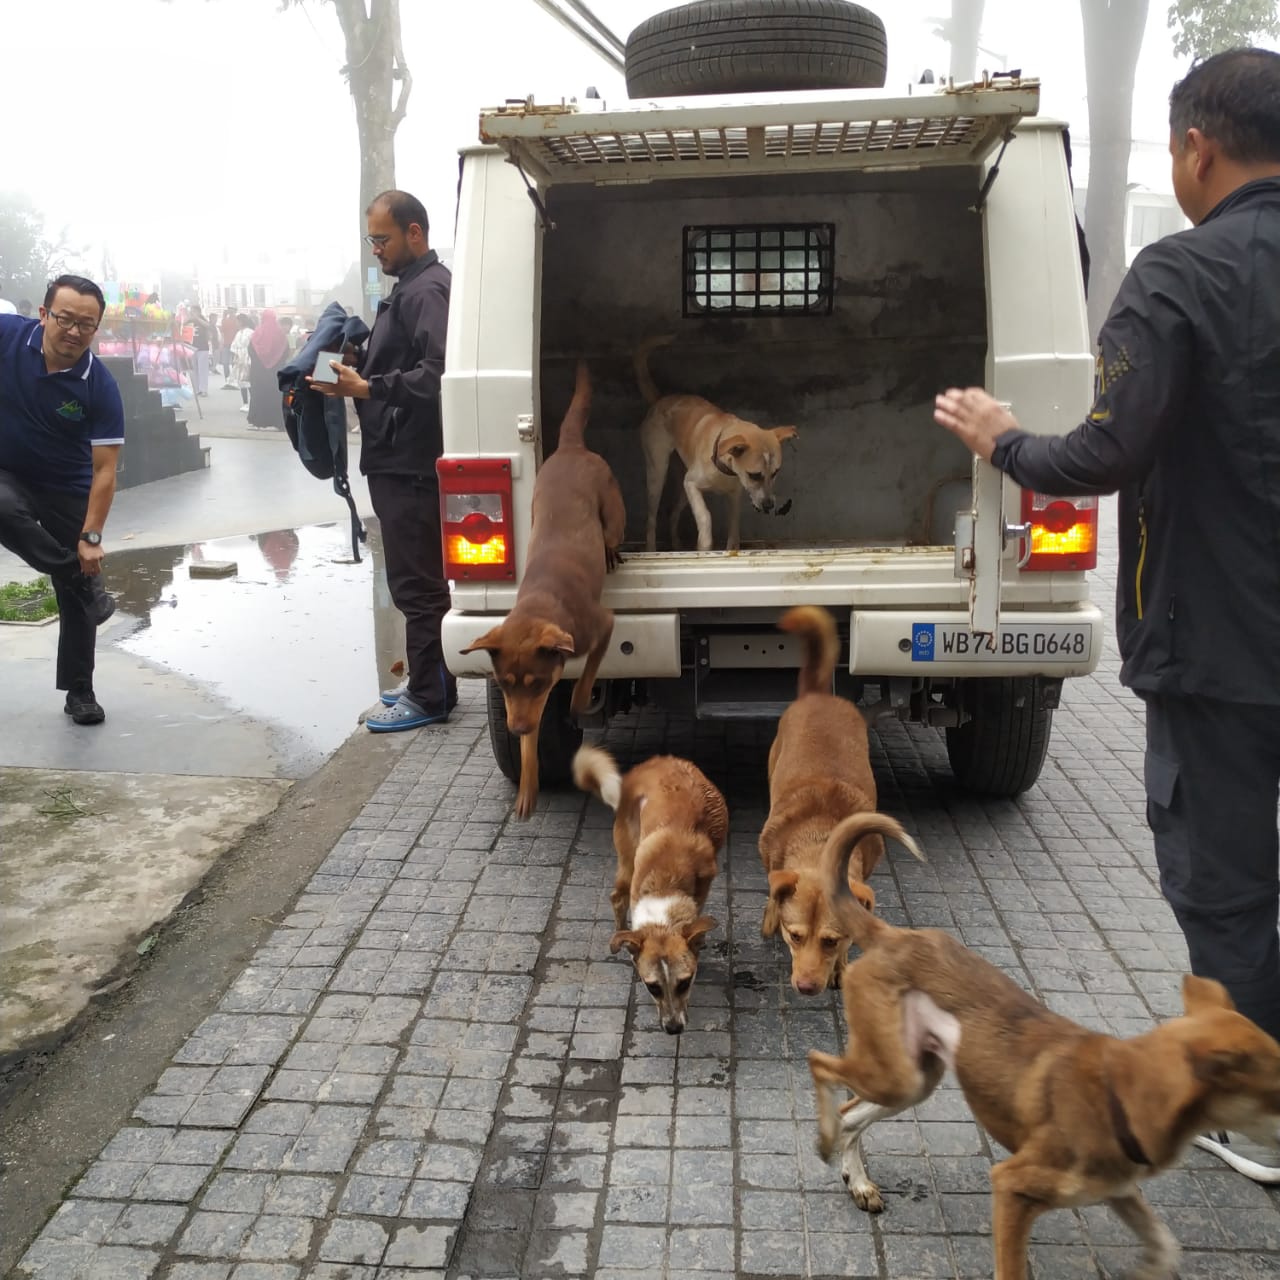 Releasing street dogs to their previous location after their ABC . Thanks to Dogs Trust for fudning the ABC Prg. of DAS (Darjeeling Animal Shelter )